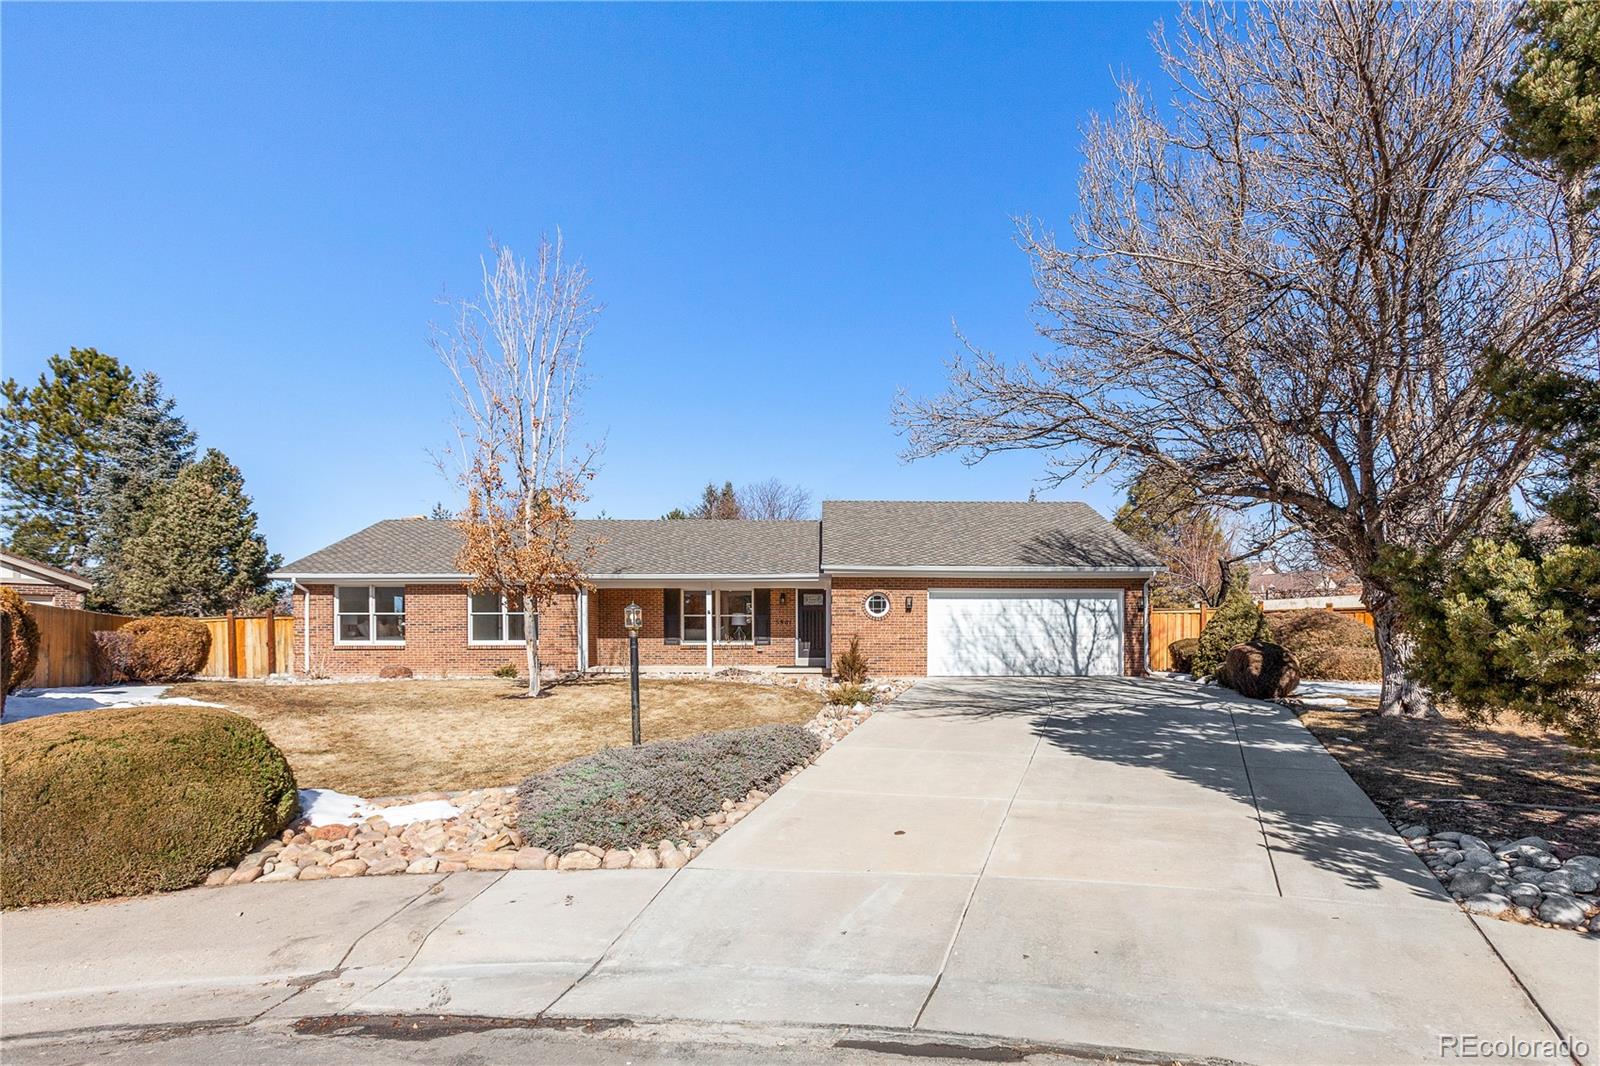 Report Image for 5901 S Dayton Court,Englewood, Colorado